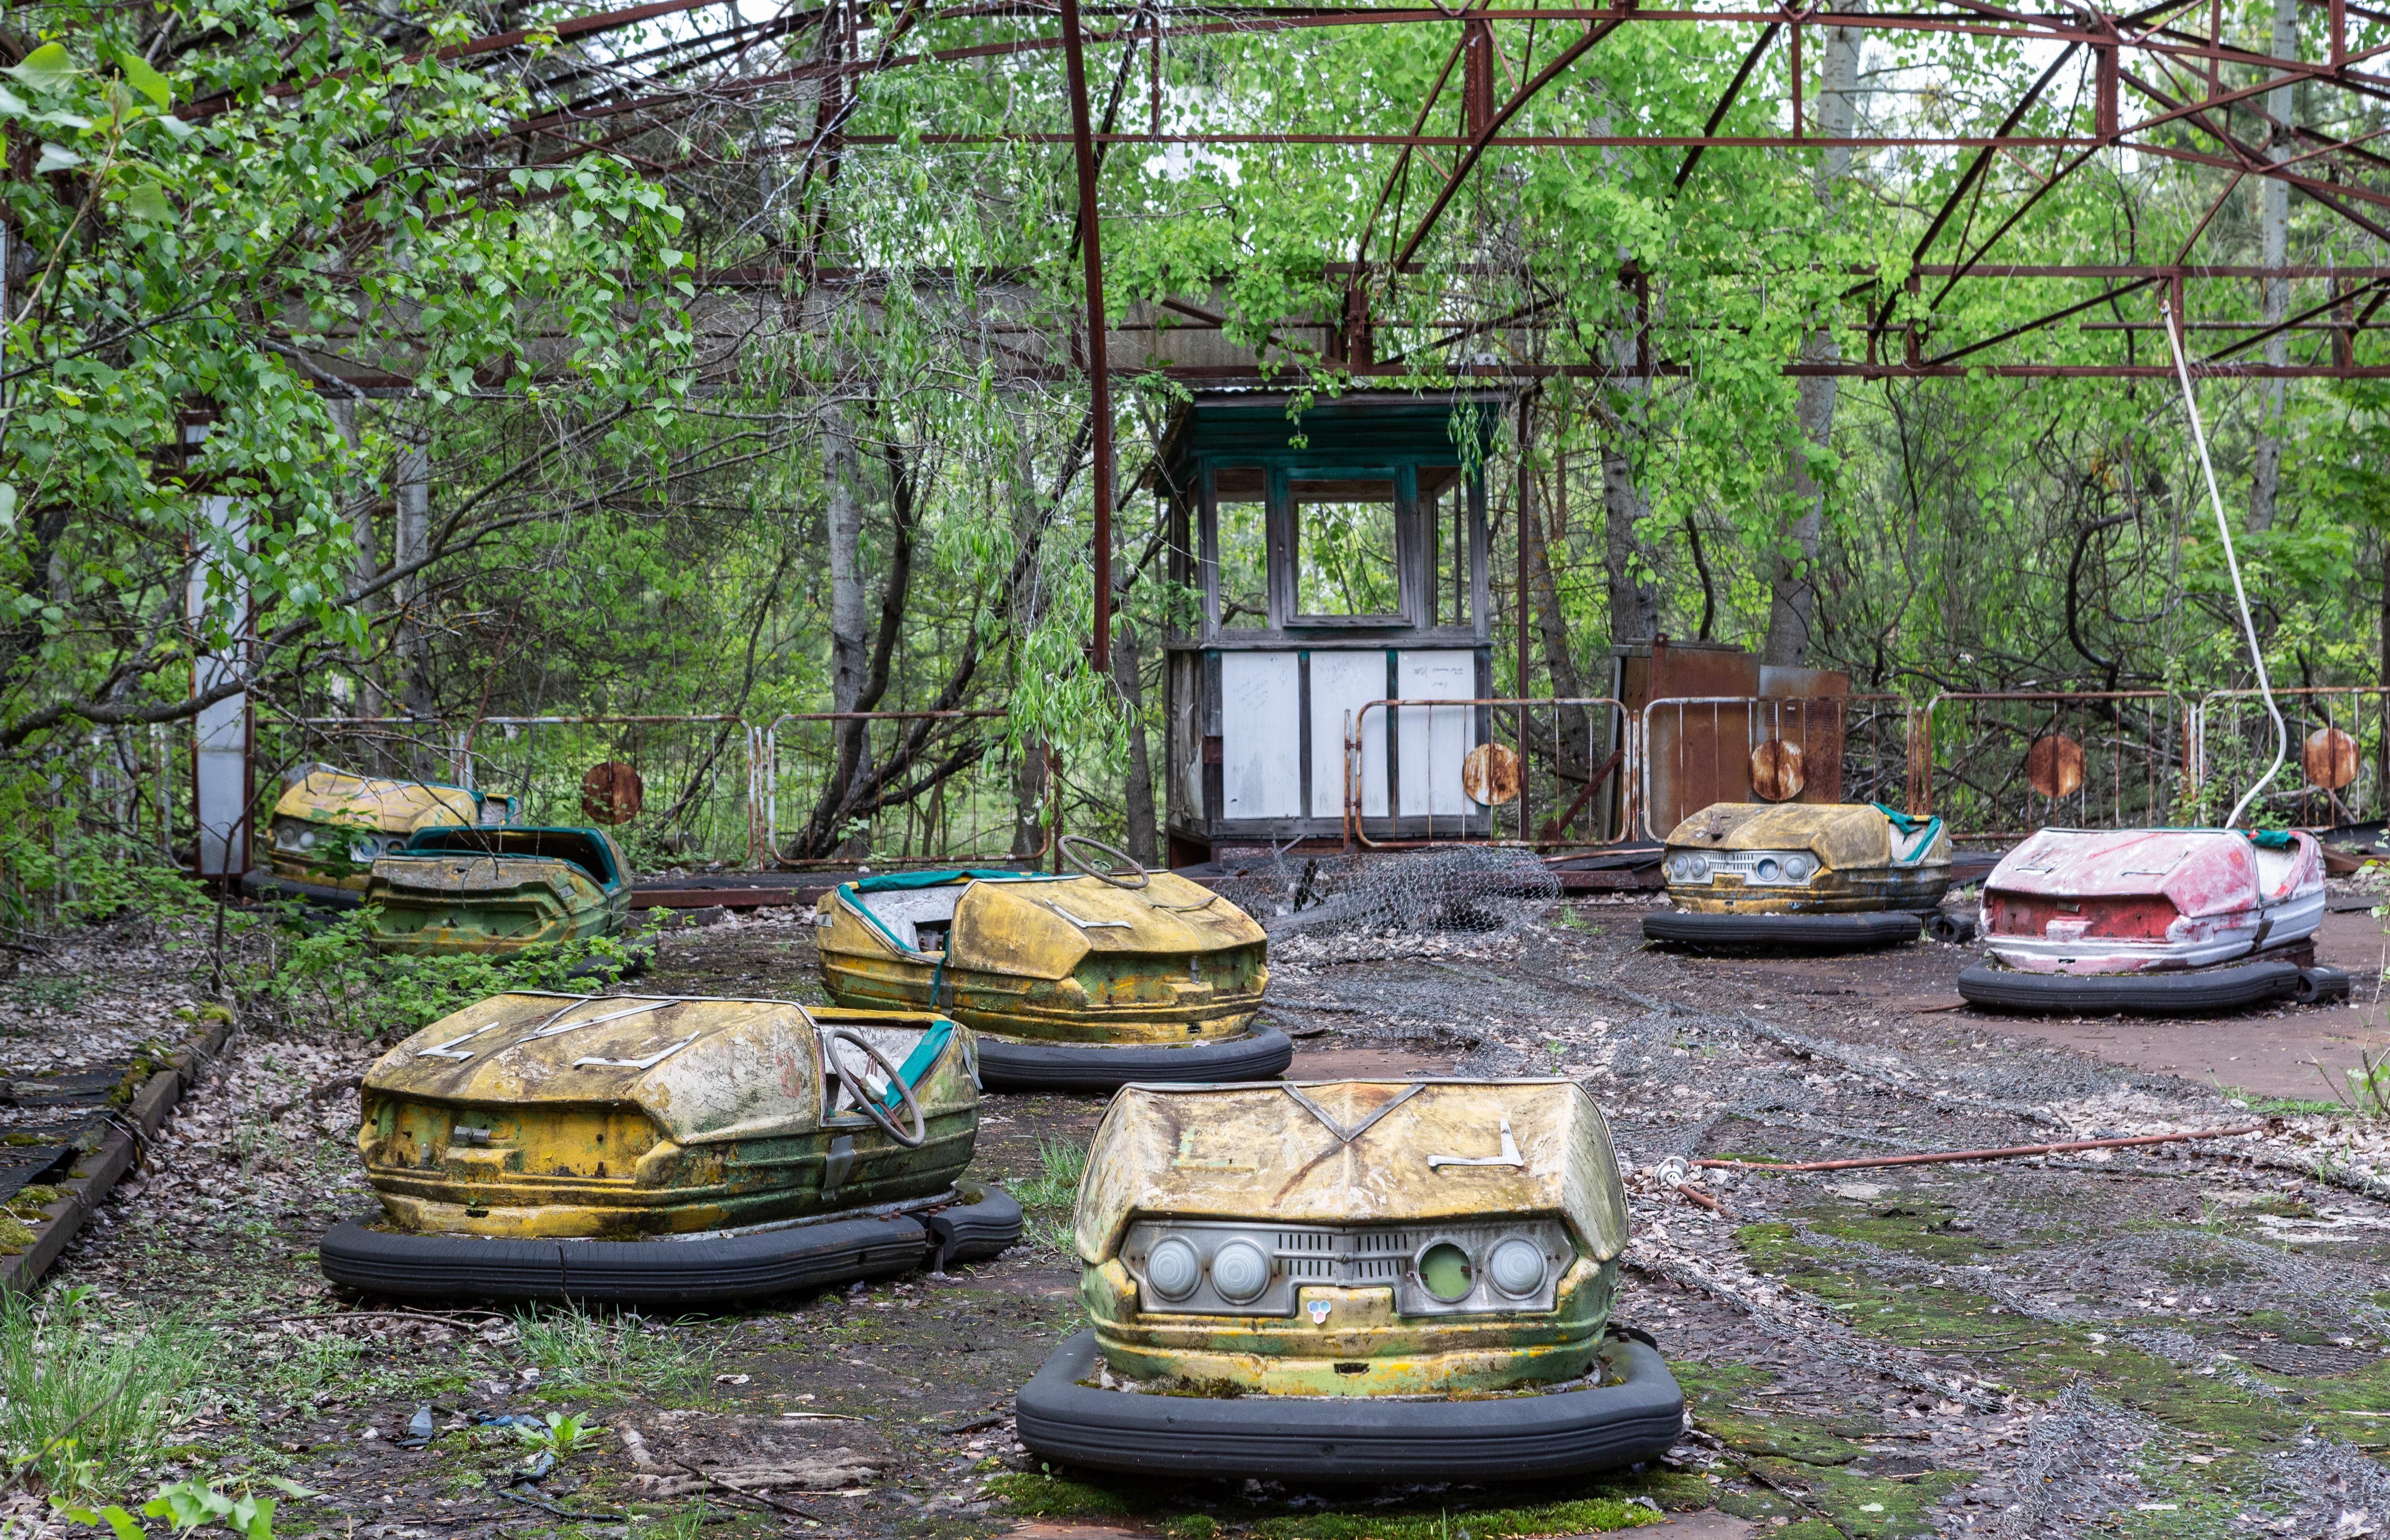 Abandoned bumper cars full of rust sit in an amusement park in the ghost city of Pripyat, Ukraine, which was evacuated on the afternoon of April 27, 1986, 36 hours after the Chernobyl Nuclear Power Plant disaster.